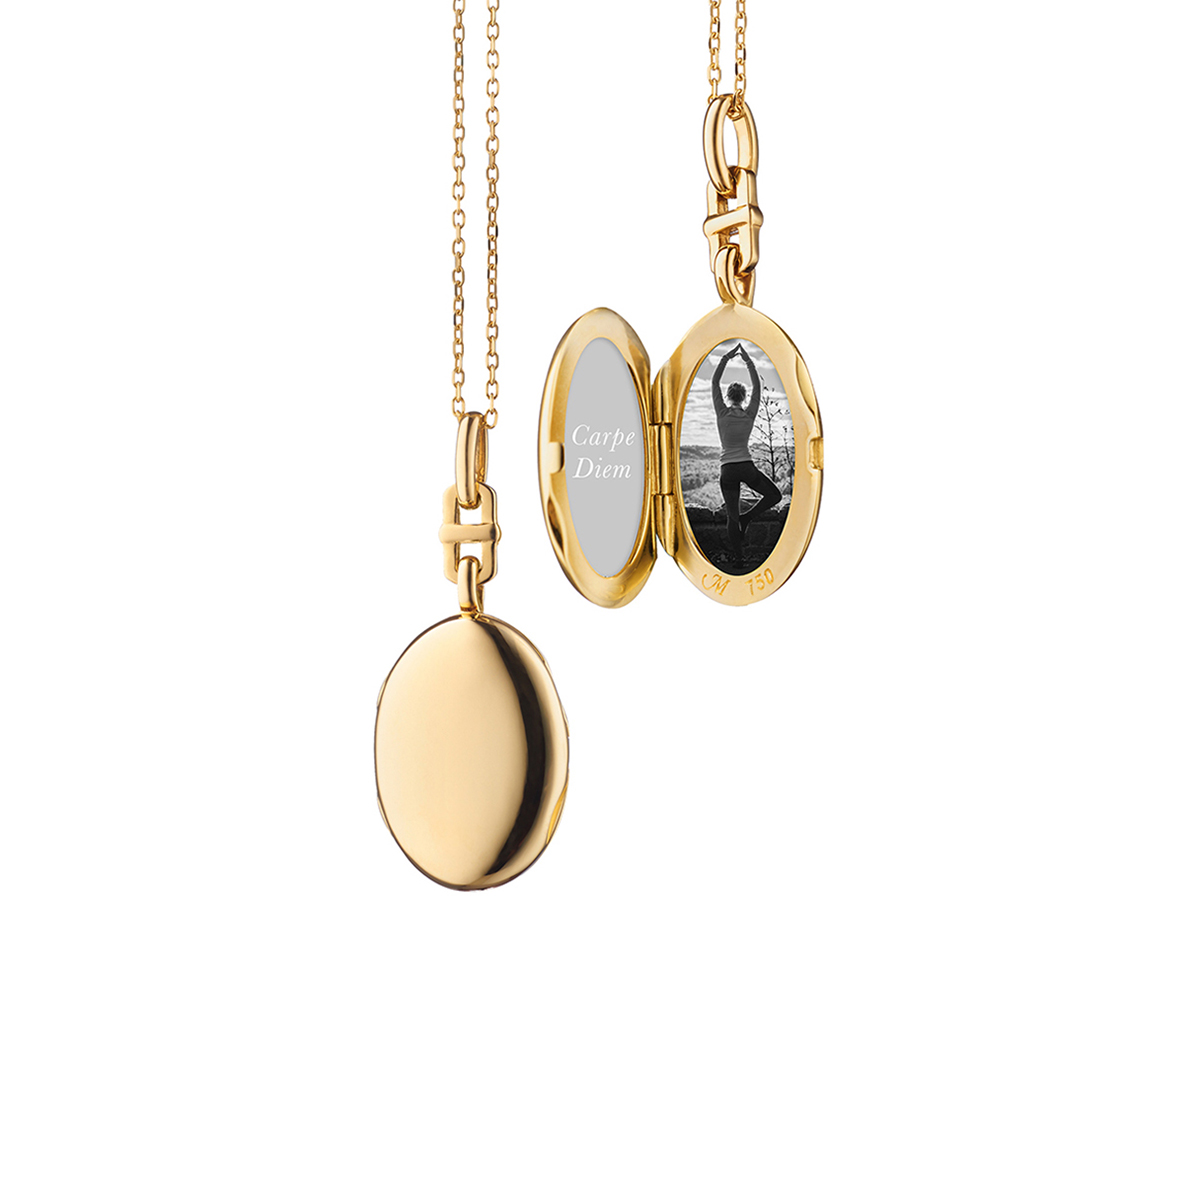 18K Yellow Gold “Eve” Oval Slim Locket with Chain